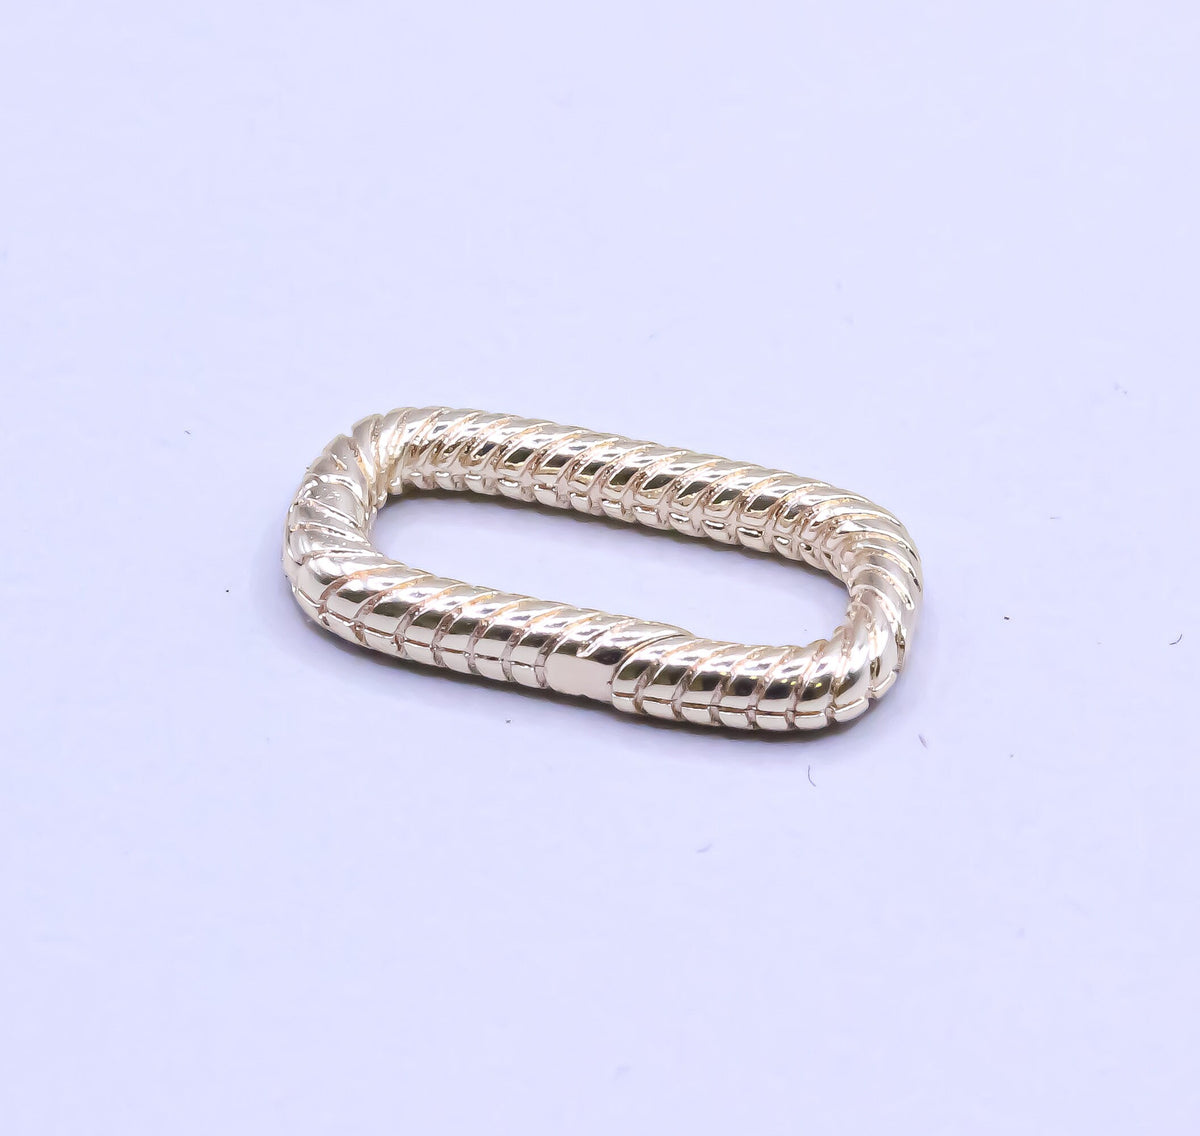 Carabiner Clasp Twisted Spring Gate Oval Clasp, Braided Rope Design Carabiner Enhancer Clasp, PBC-83